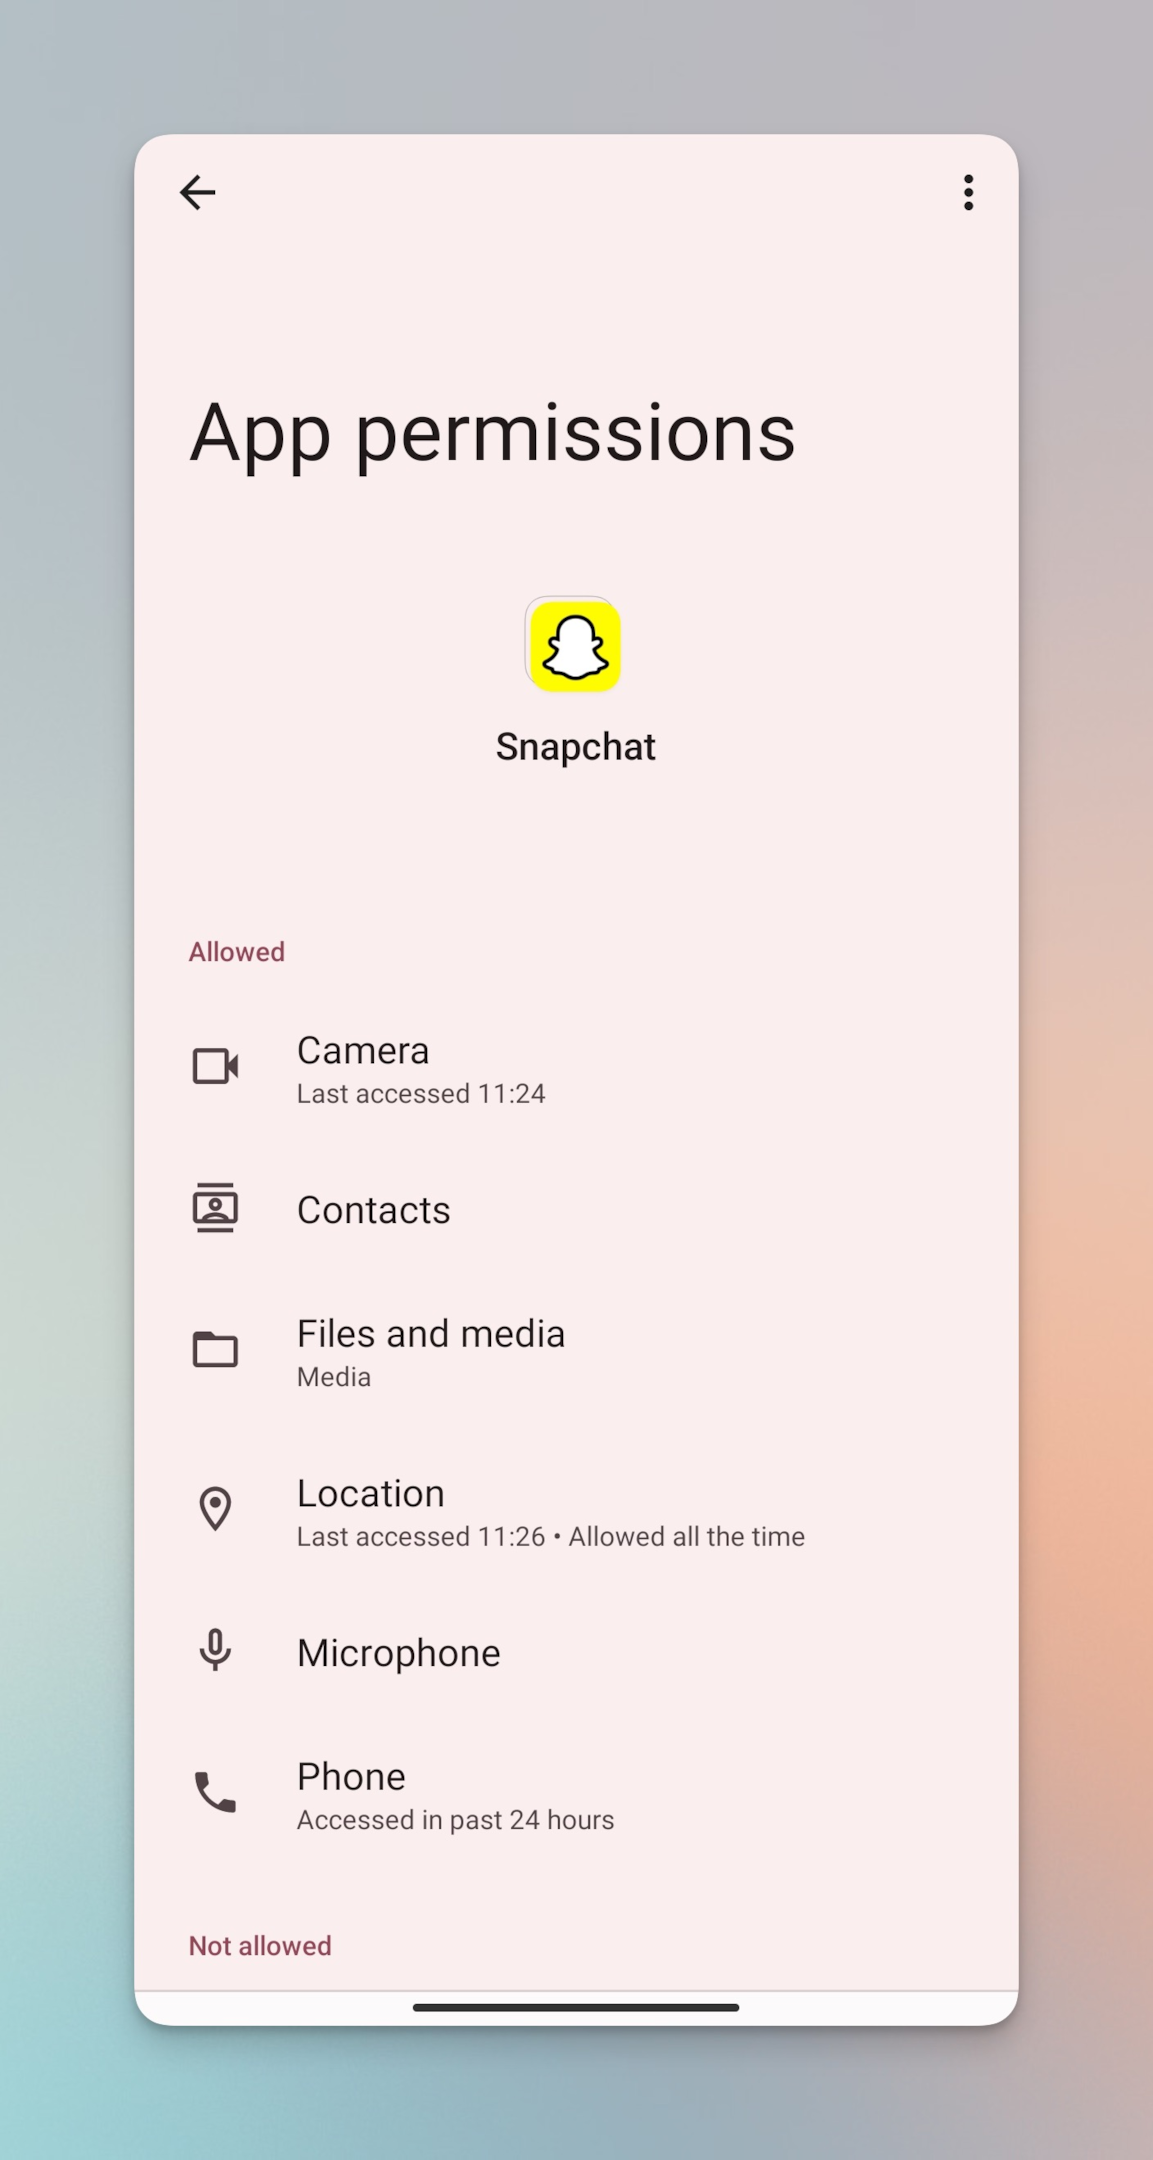 Remote.tools showing app permissions page for Snapchat app for Android